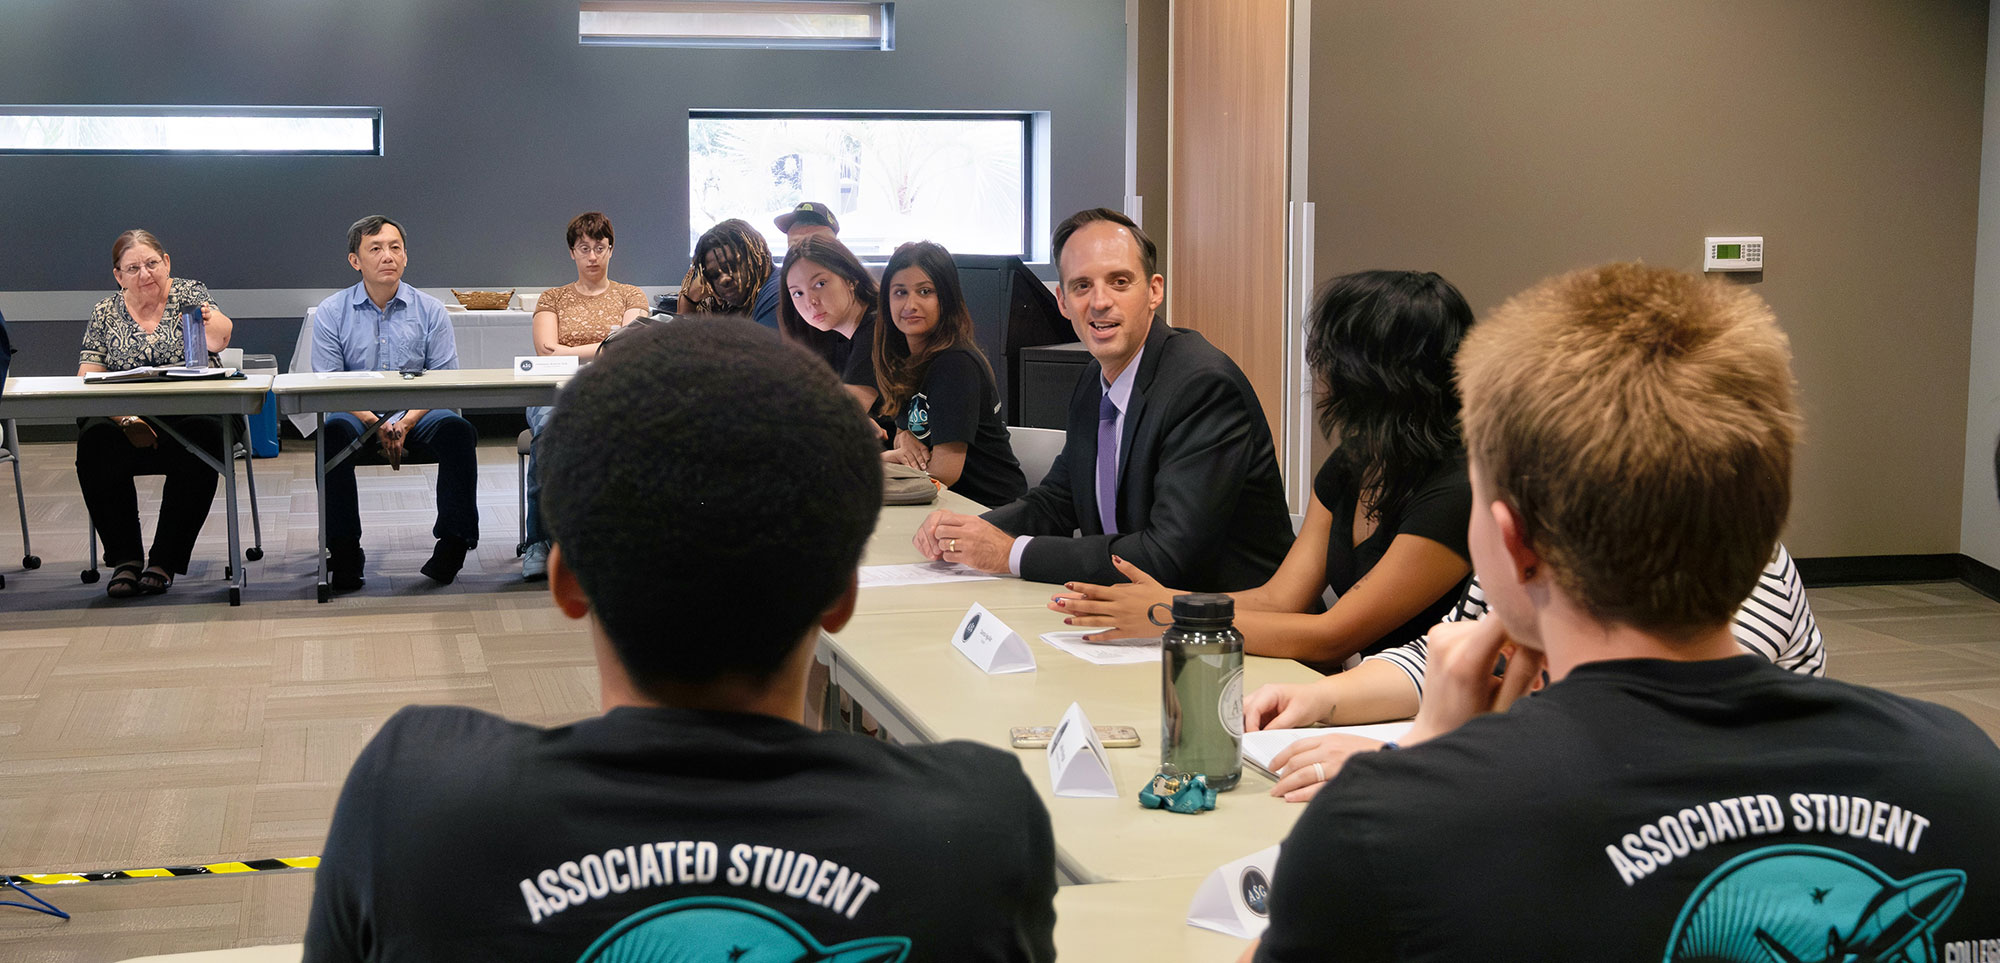 Chancellor Smith and 10 students sit around a u shaped table for a discussion